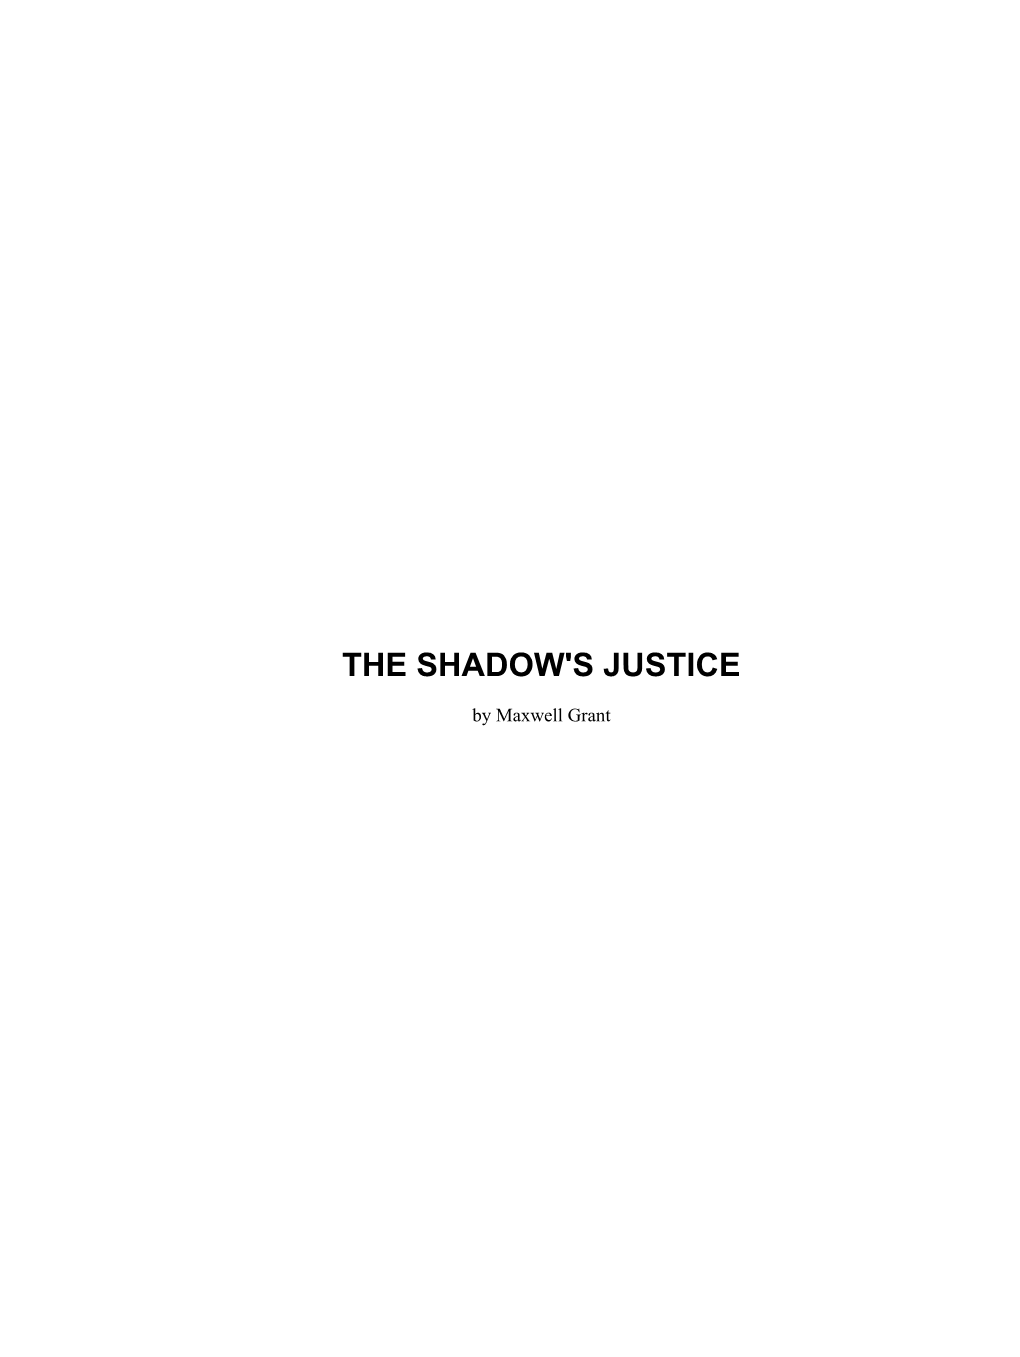 The Shadow's Justice